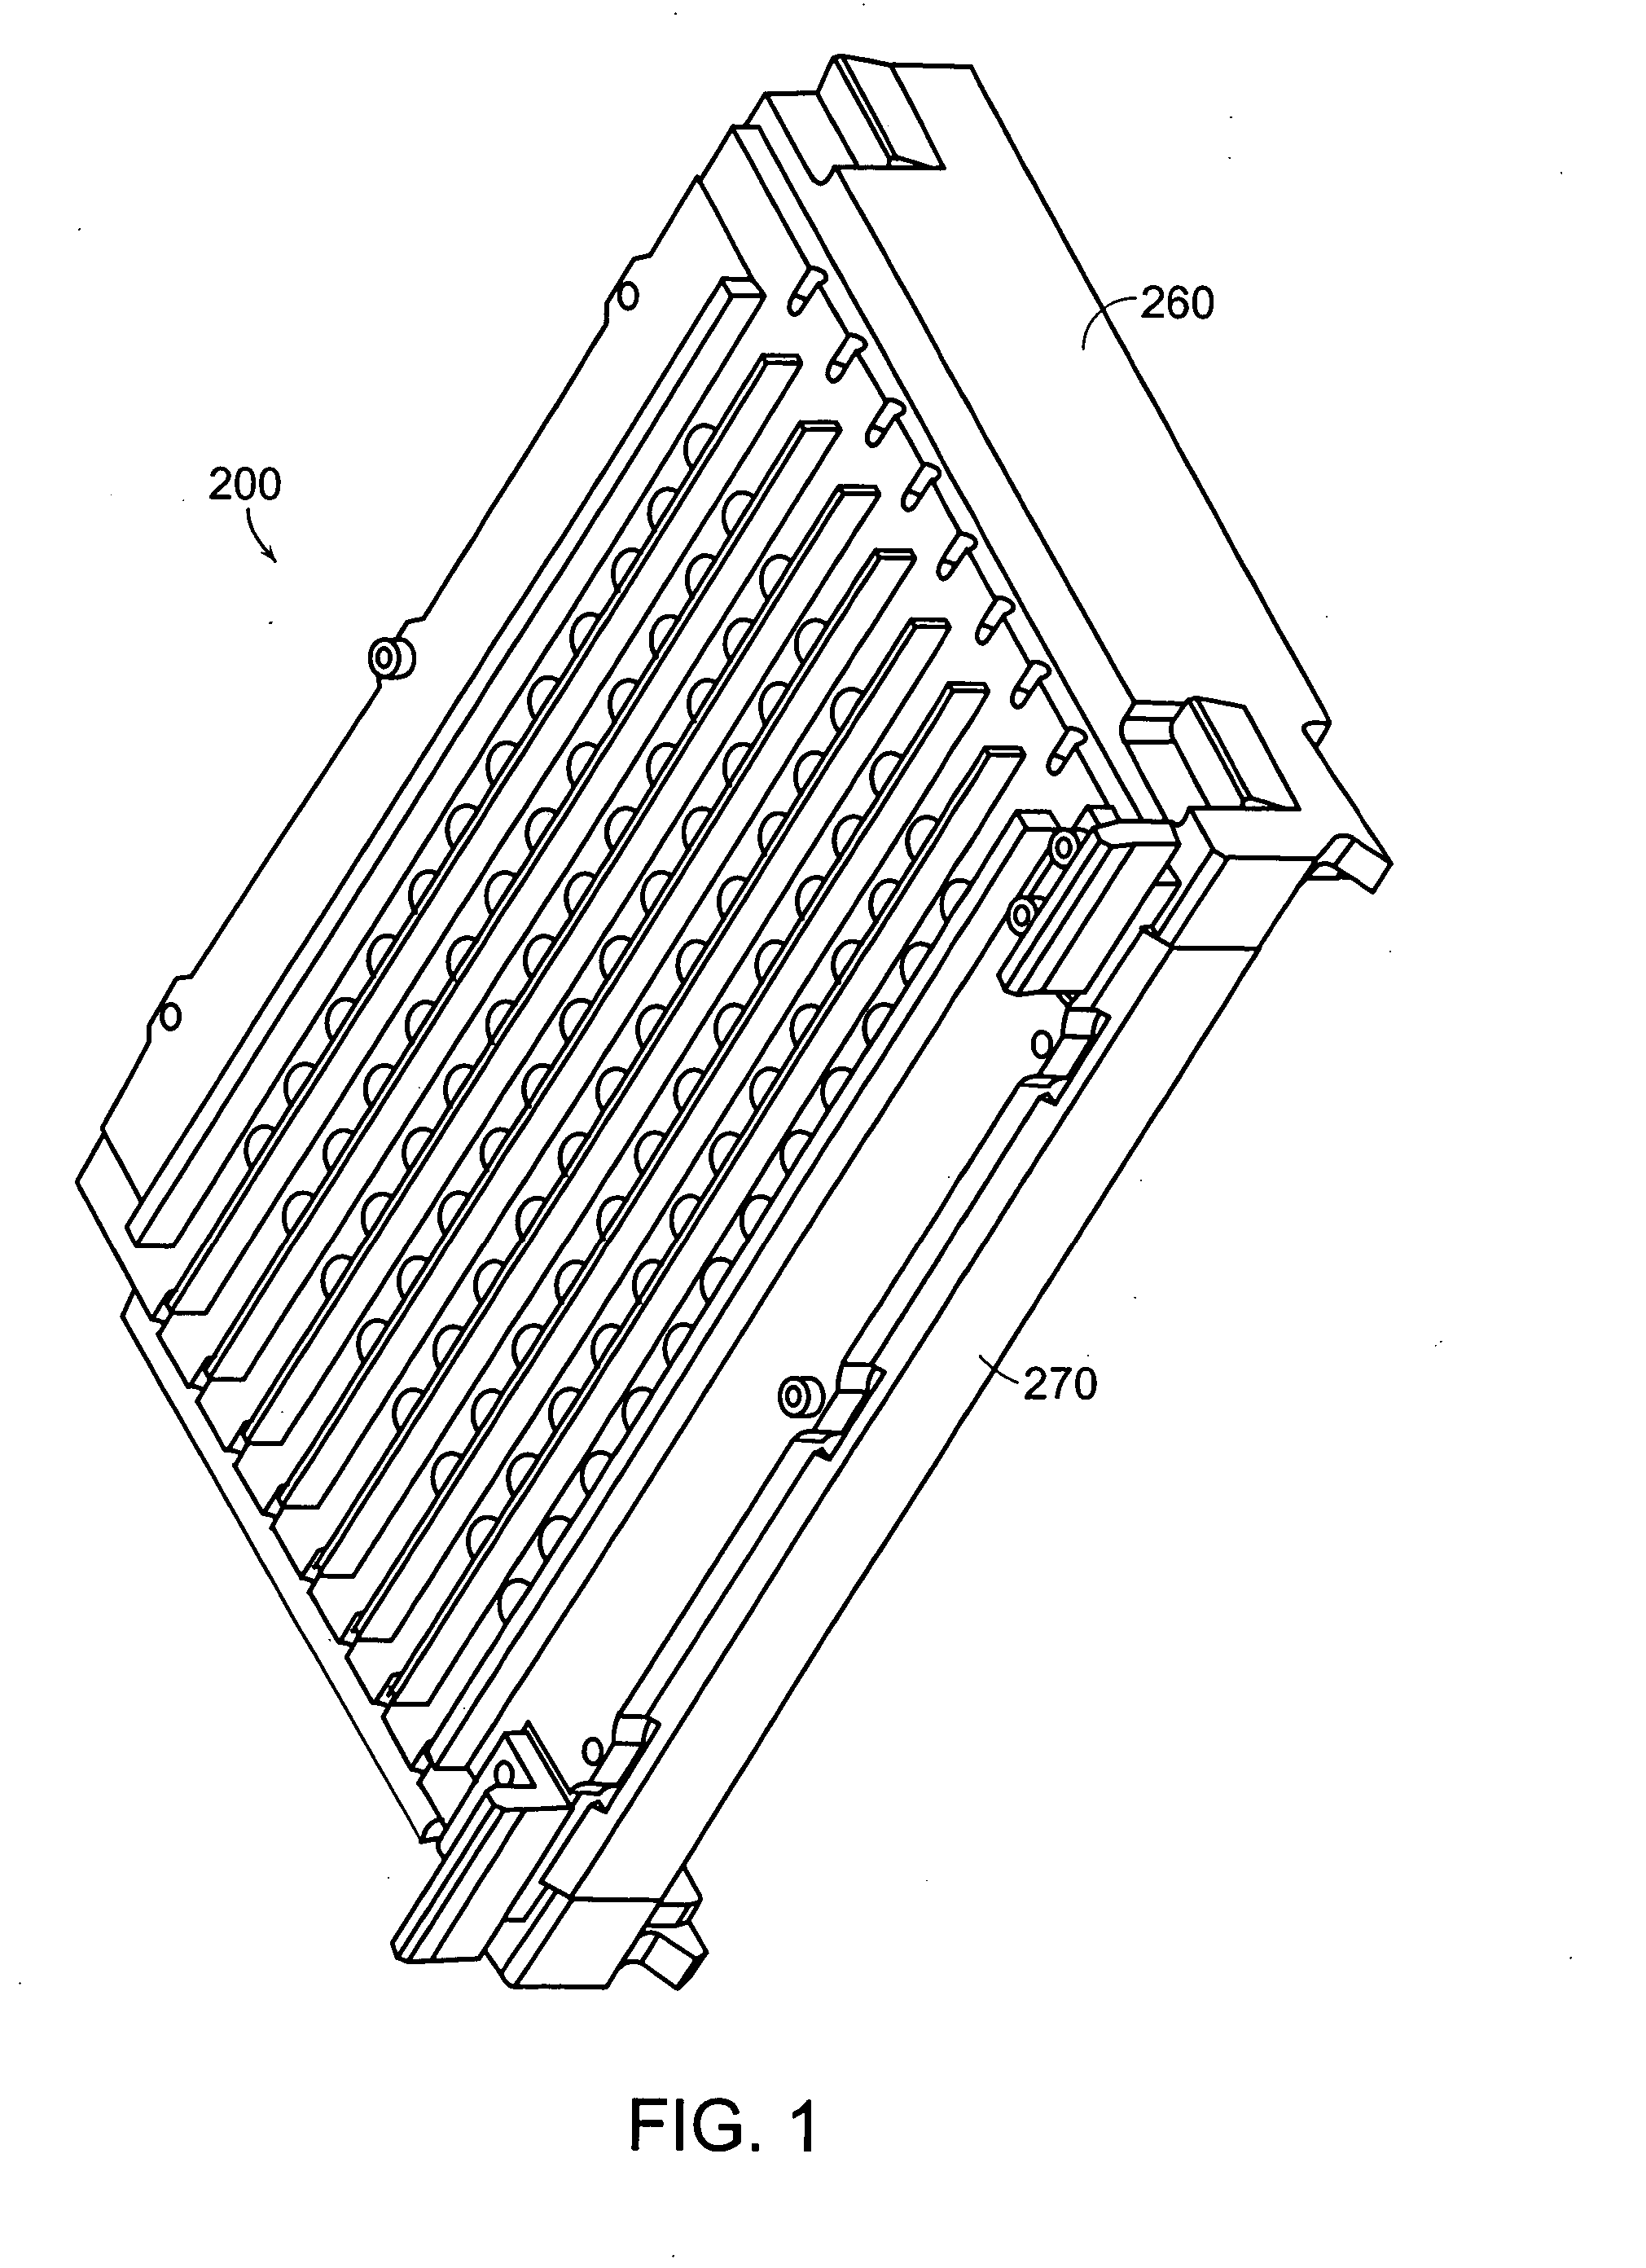 Method and apparatus for cover assembly for thermal cycling of samples